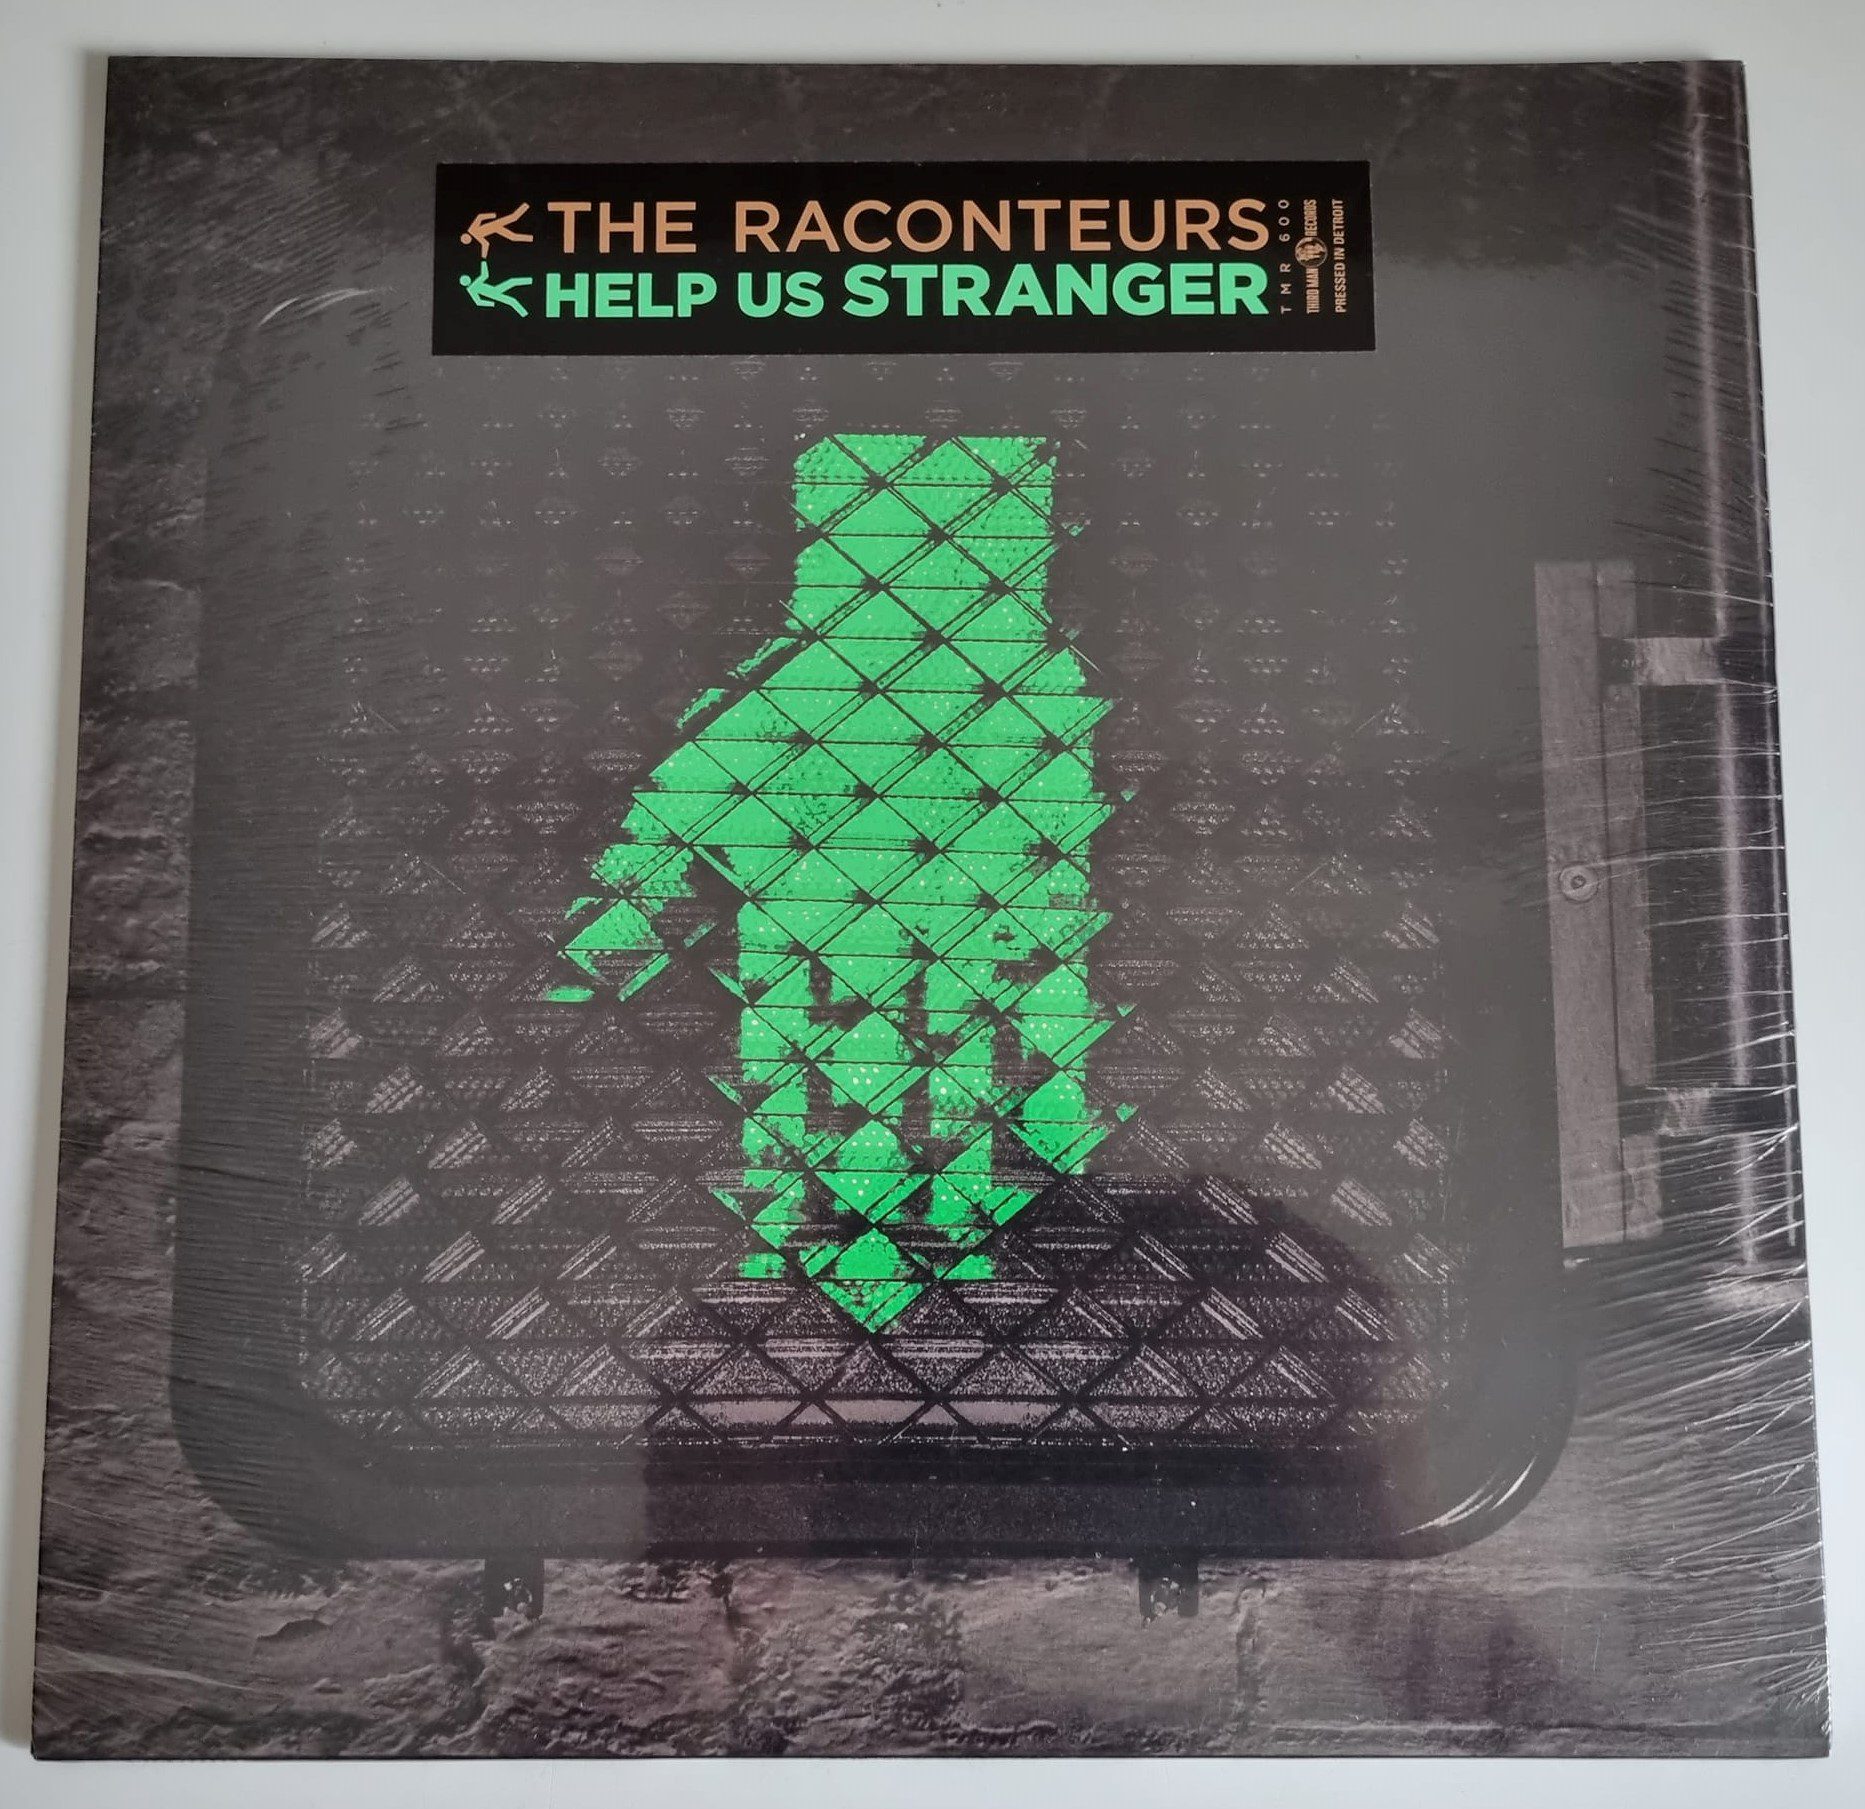 Buy this rare Raconteurs record by clicking here